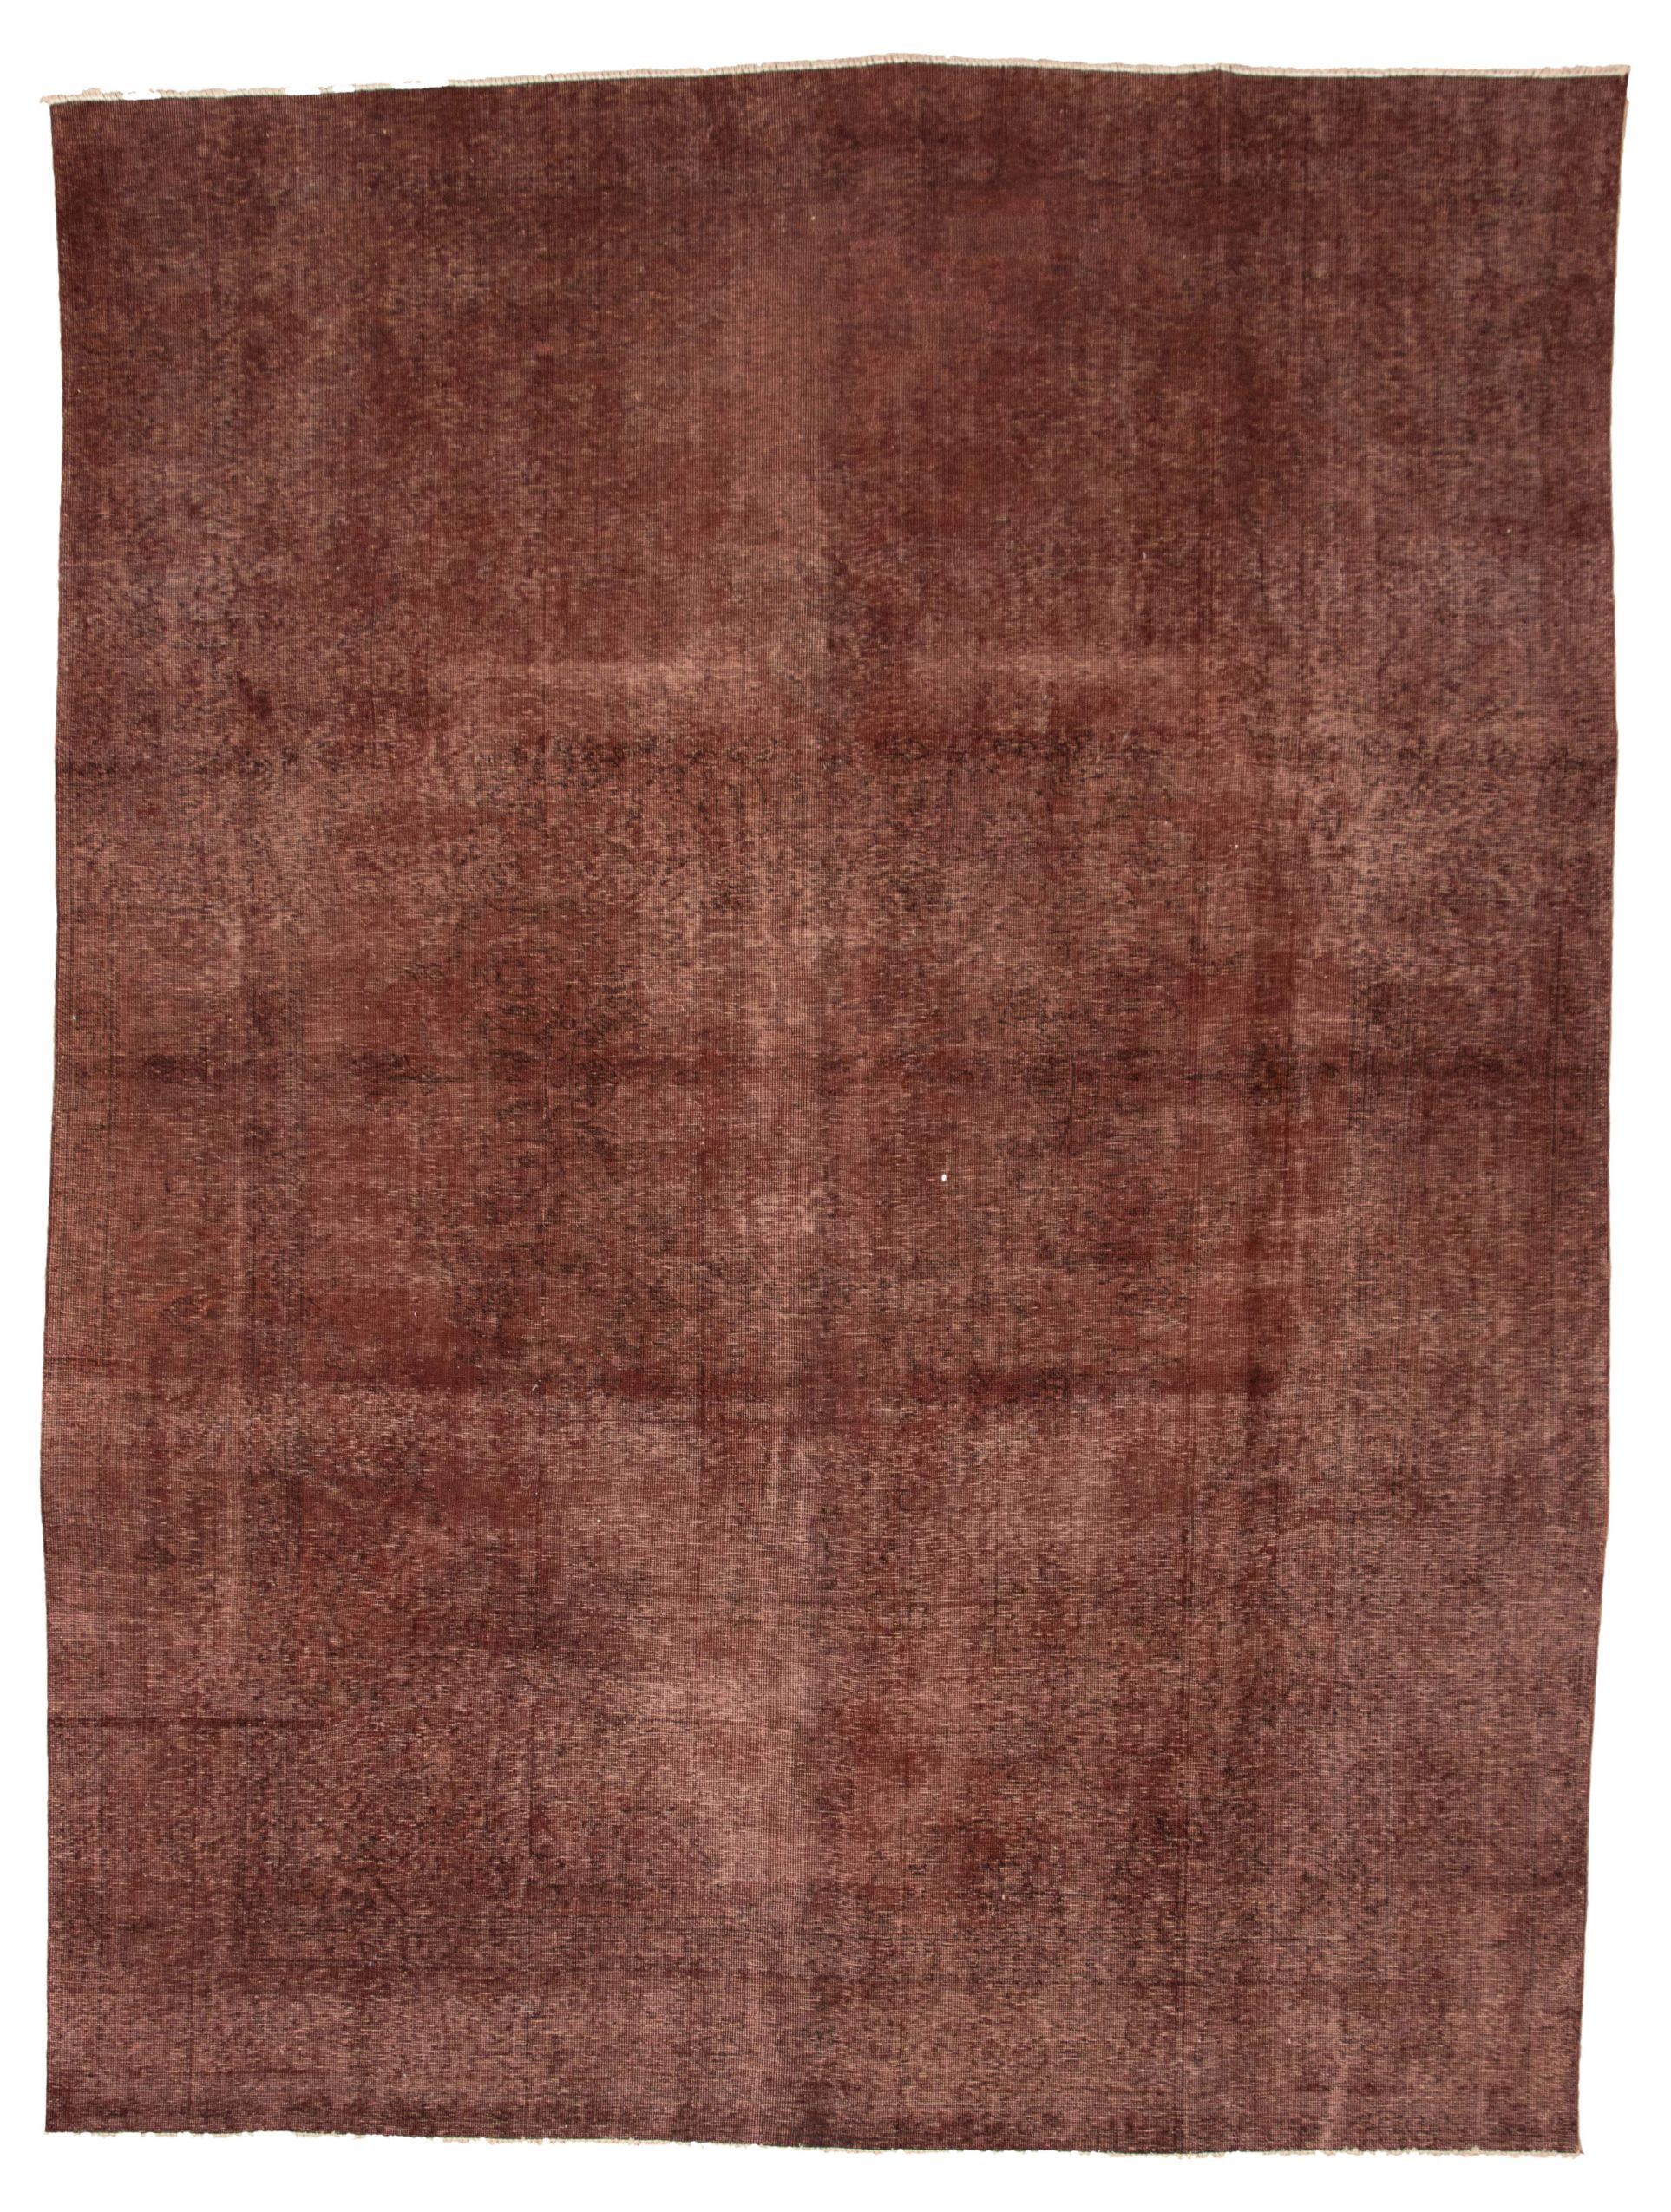 Hand-knotted Color Transition Brown Wool Rug 9'3" x 12'3" Size: 9'3" x 12'3"  